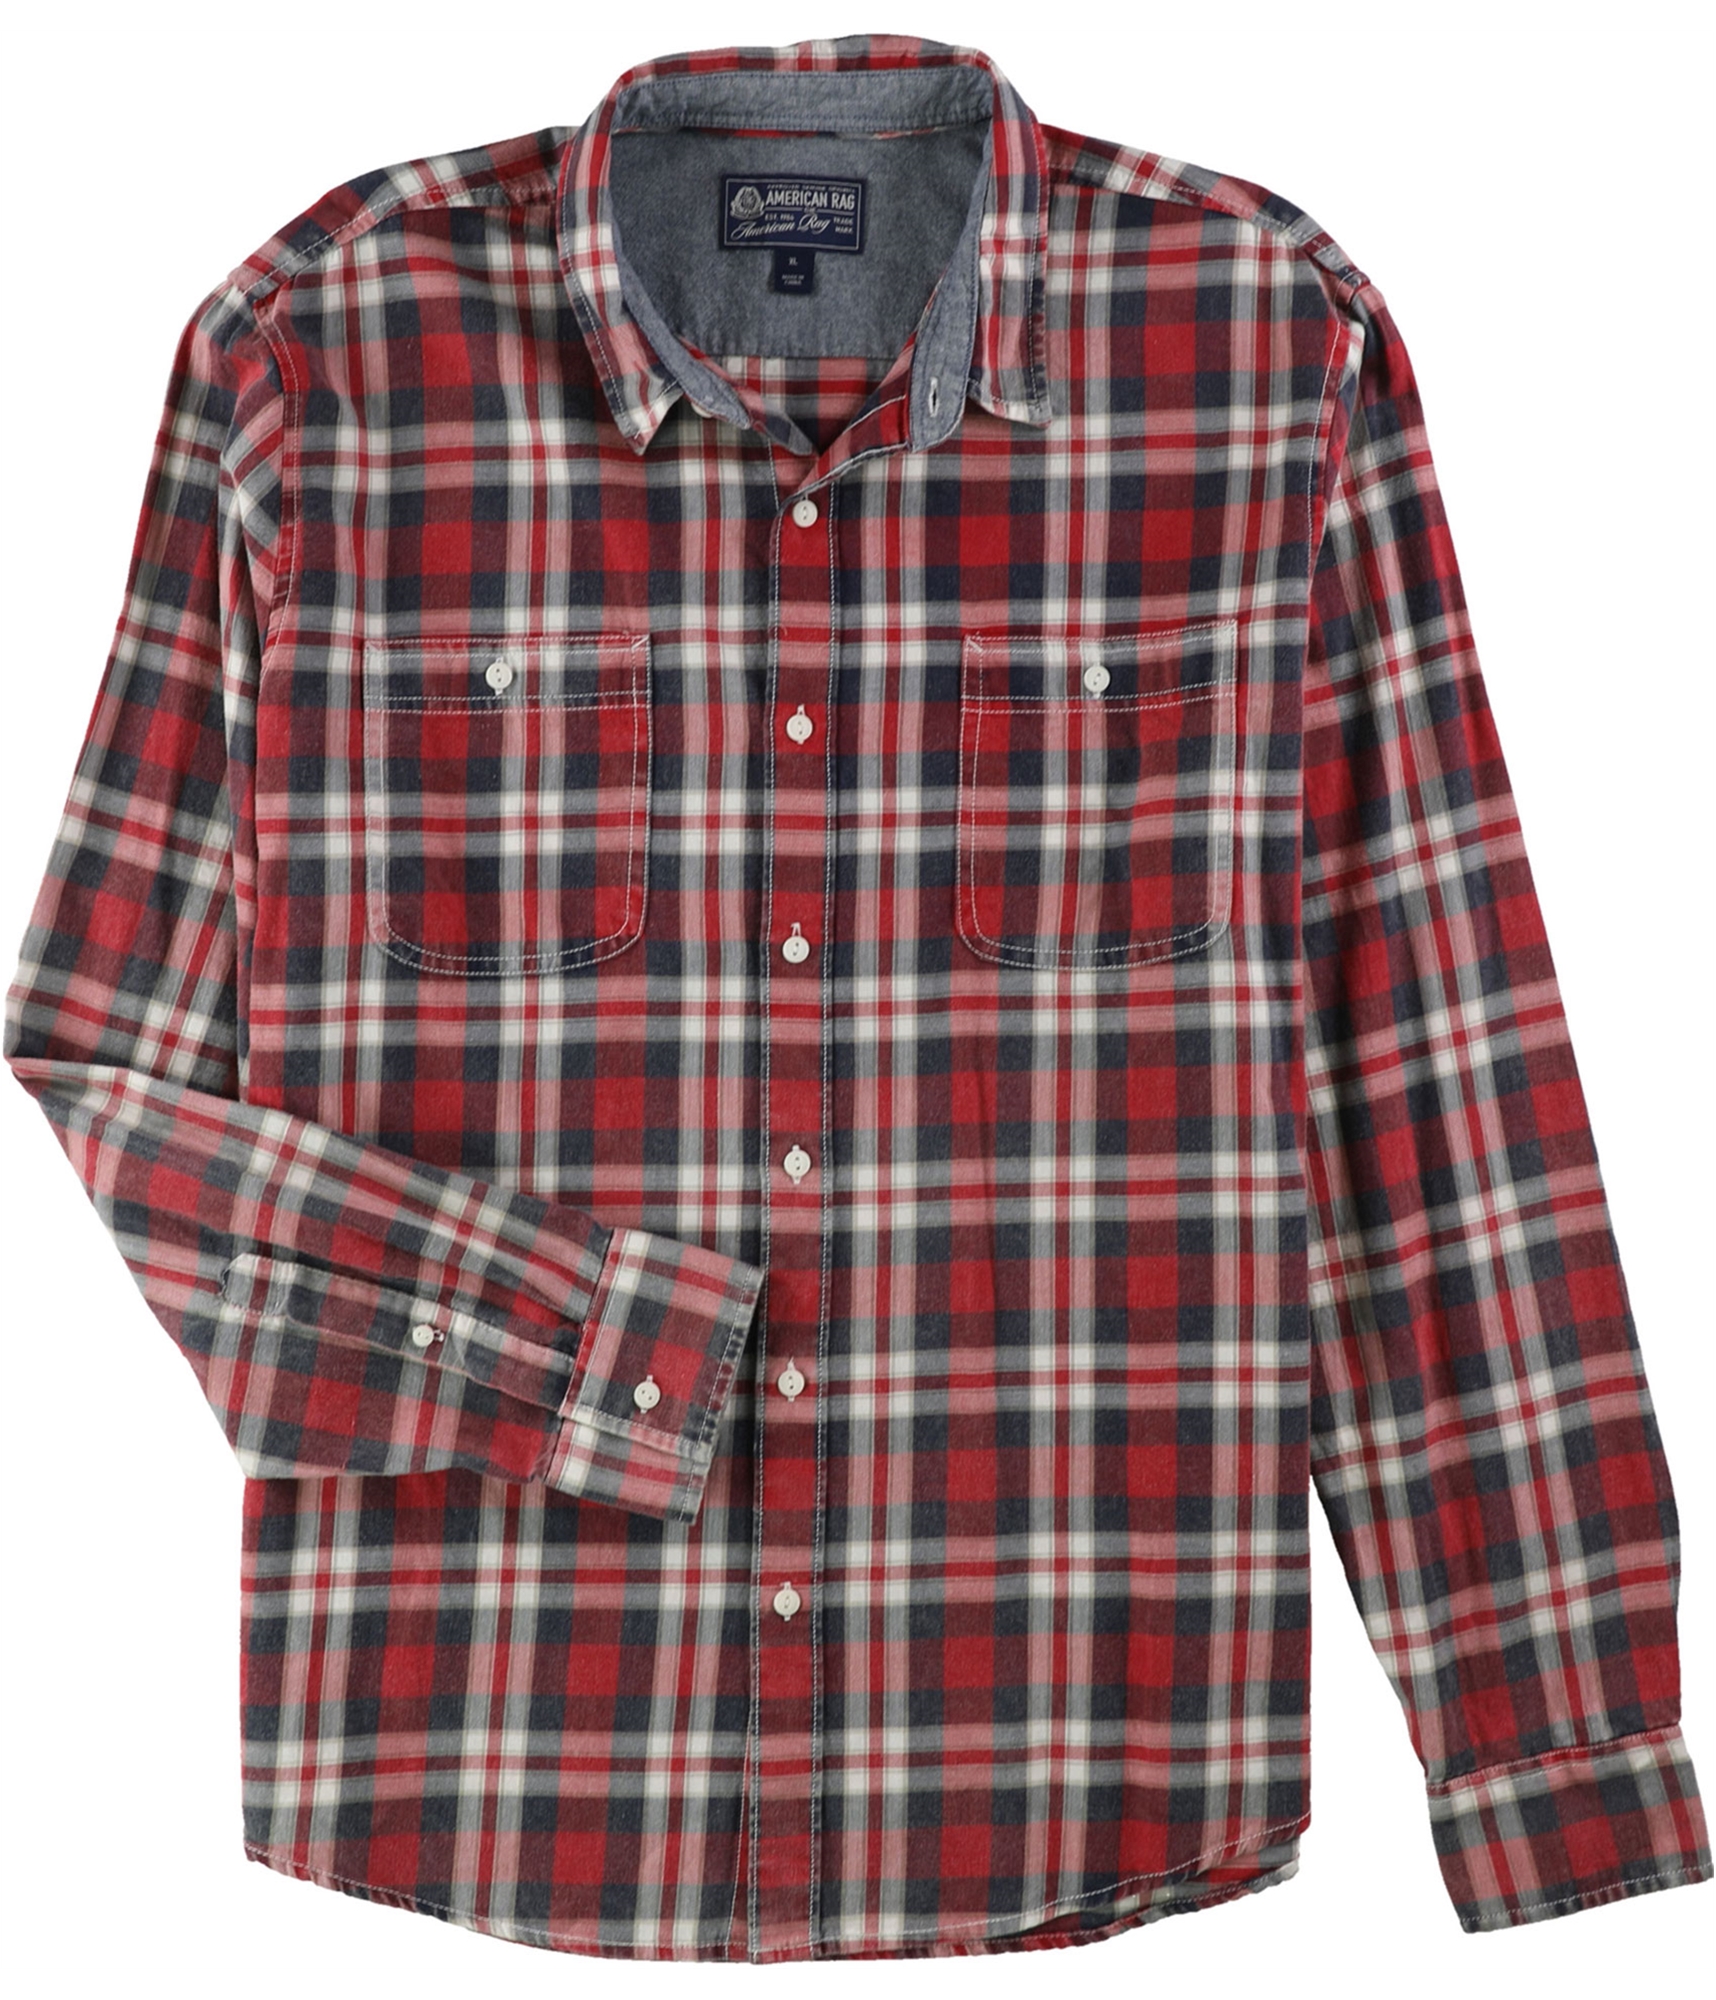 American Rag Mens Washed Plaid Button Up Shirt, Red, Large | eBay